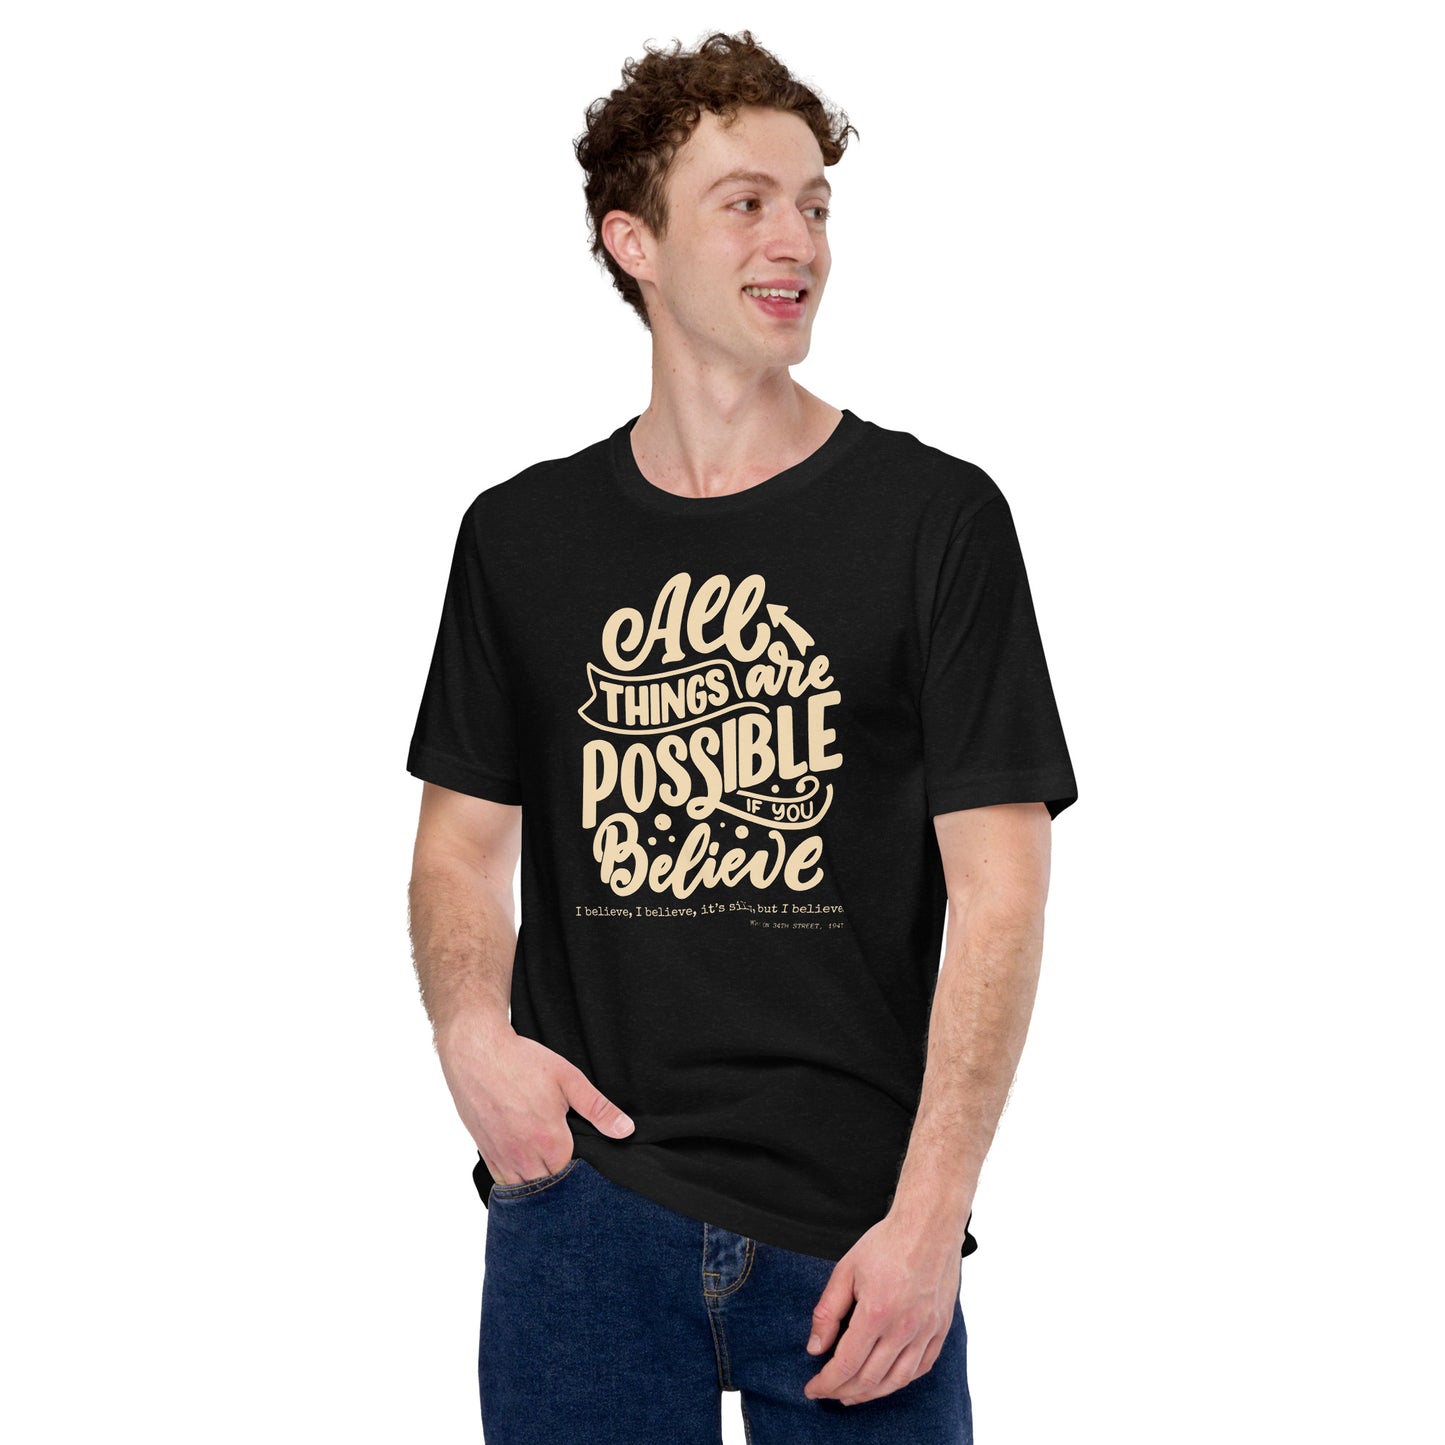 All Things Are Possible If You Believe, It's Silly, but I Believe Unisex t-shirt, Christmas Message, Miracle on 34th Street Movie Quote